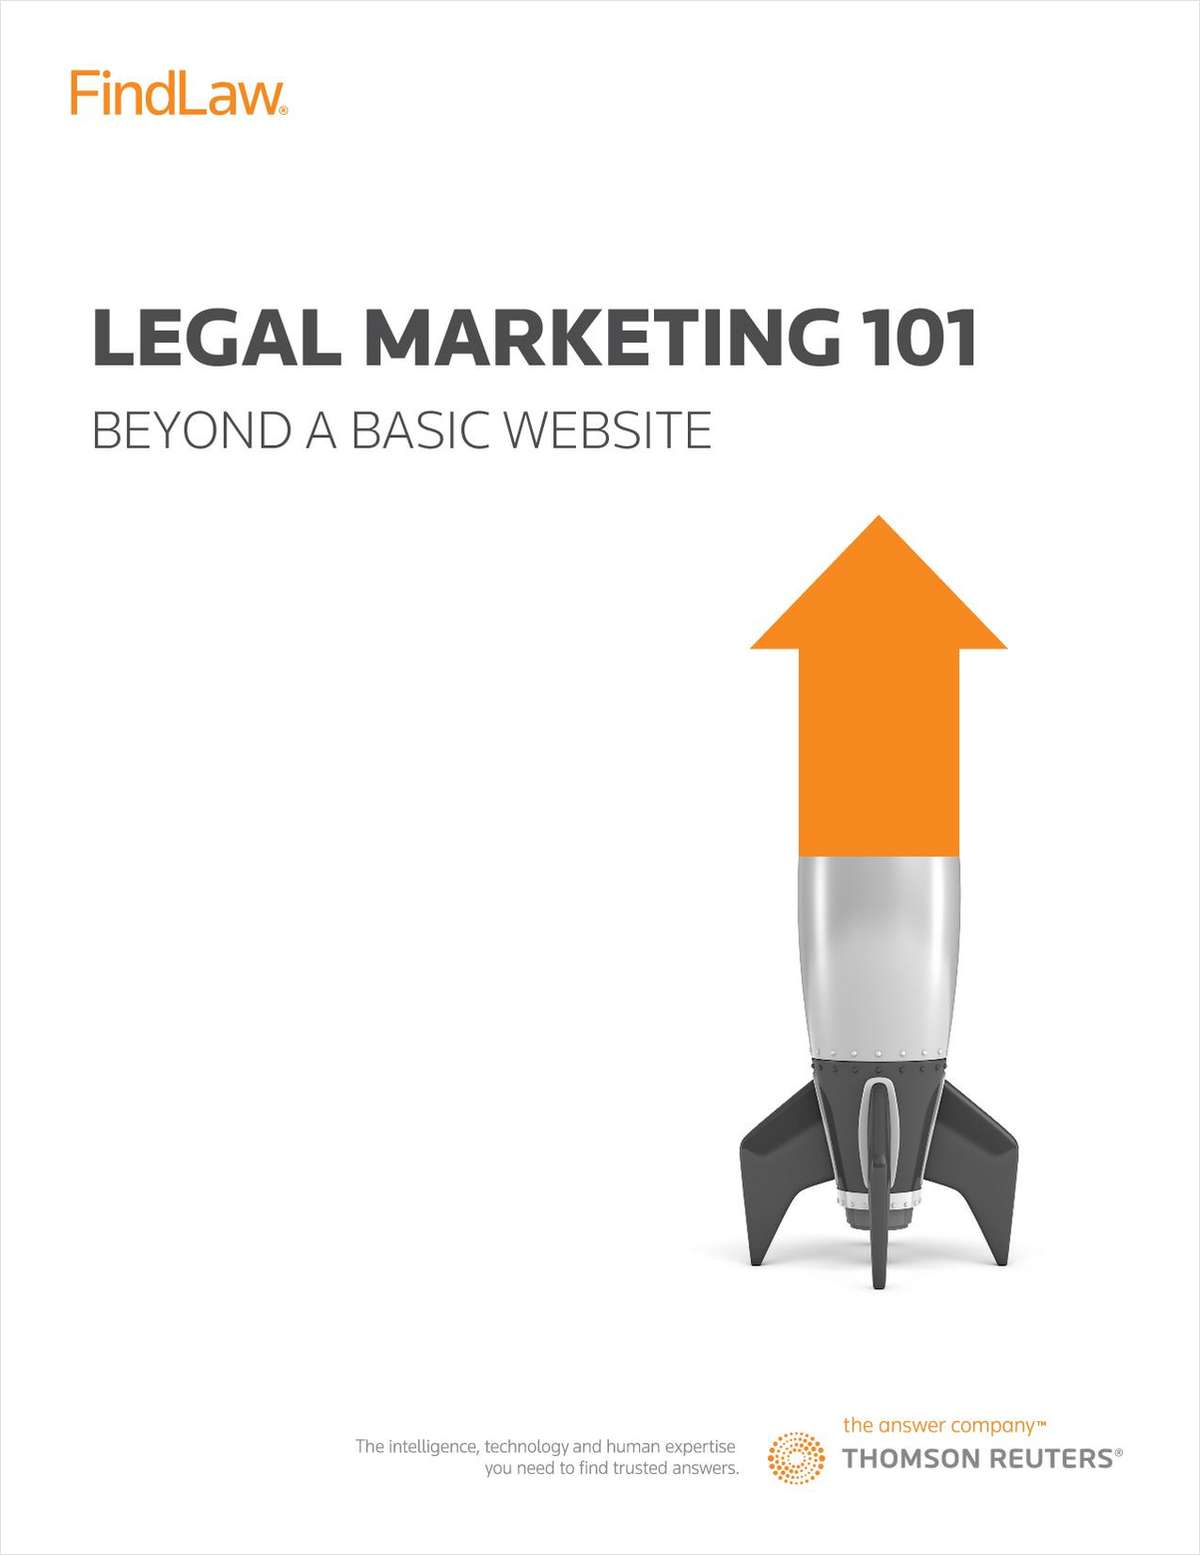 Marketing 101 in the Legal Industry